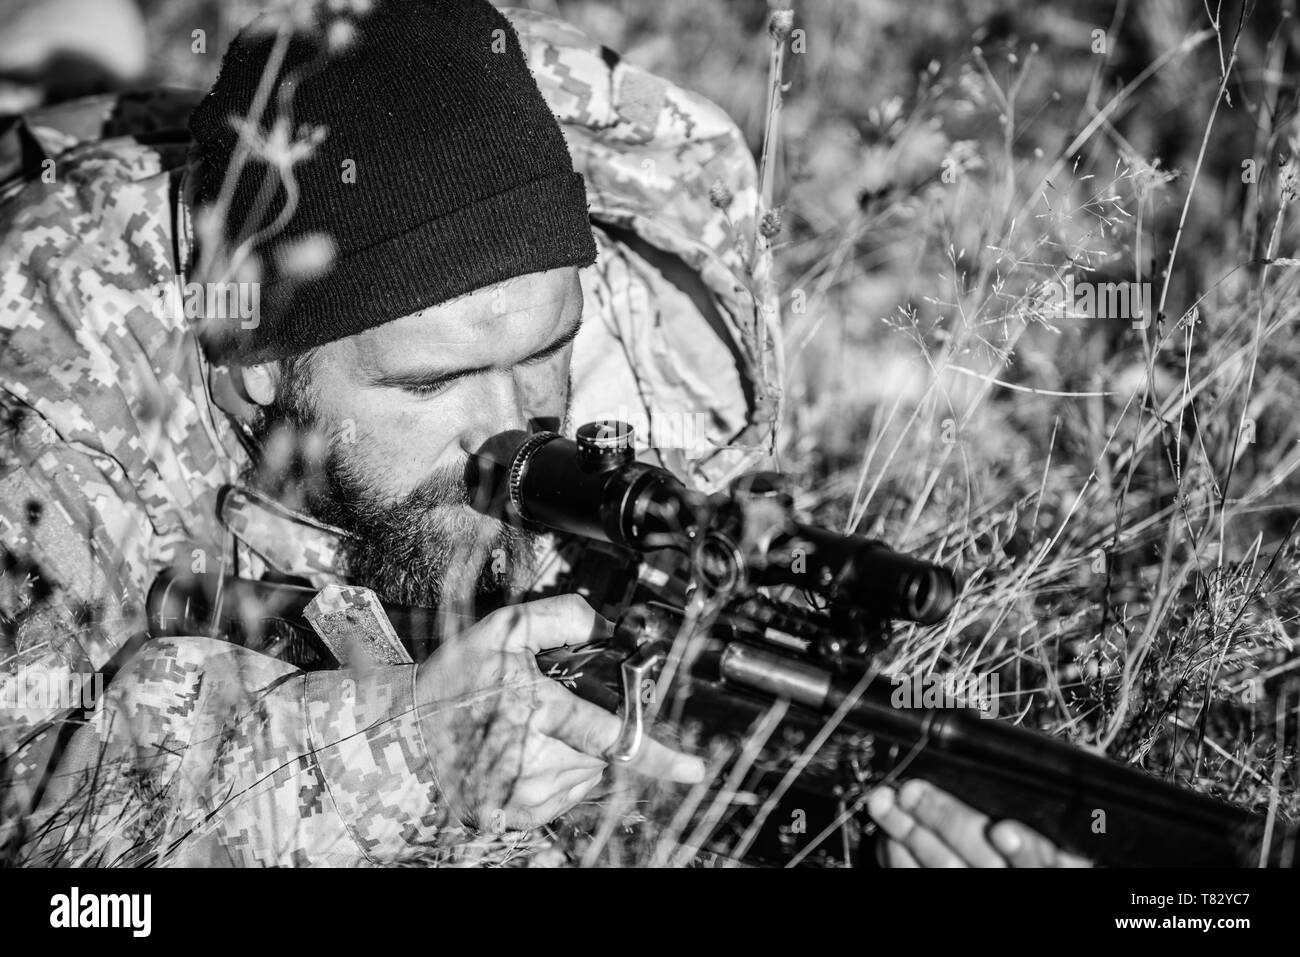 Army forces. Camouflage. Military uniform fashion. Bearded man hunter. Hunting skills and weapon equipment. How turn hunting into hobby. Man hunter with rifle gun. Boot camp. I got my eye on you. Stock Photo